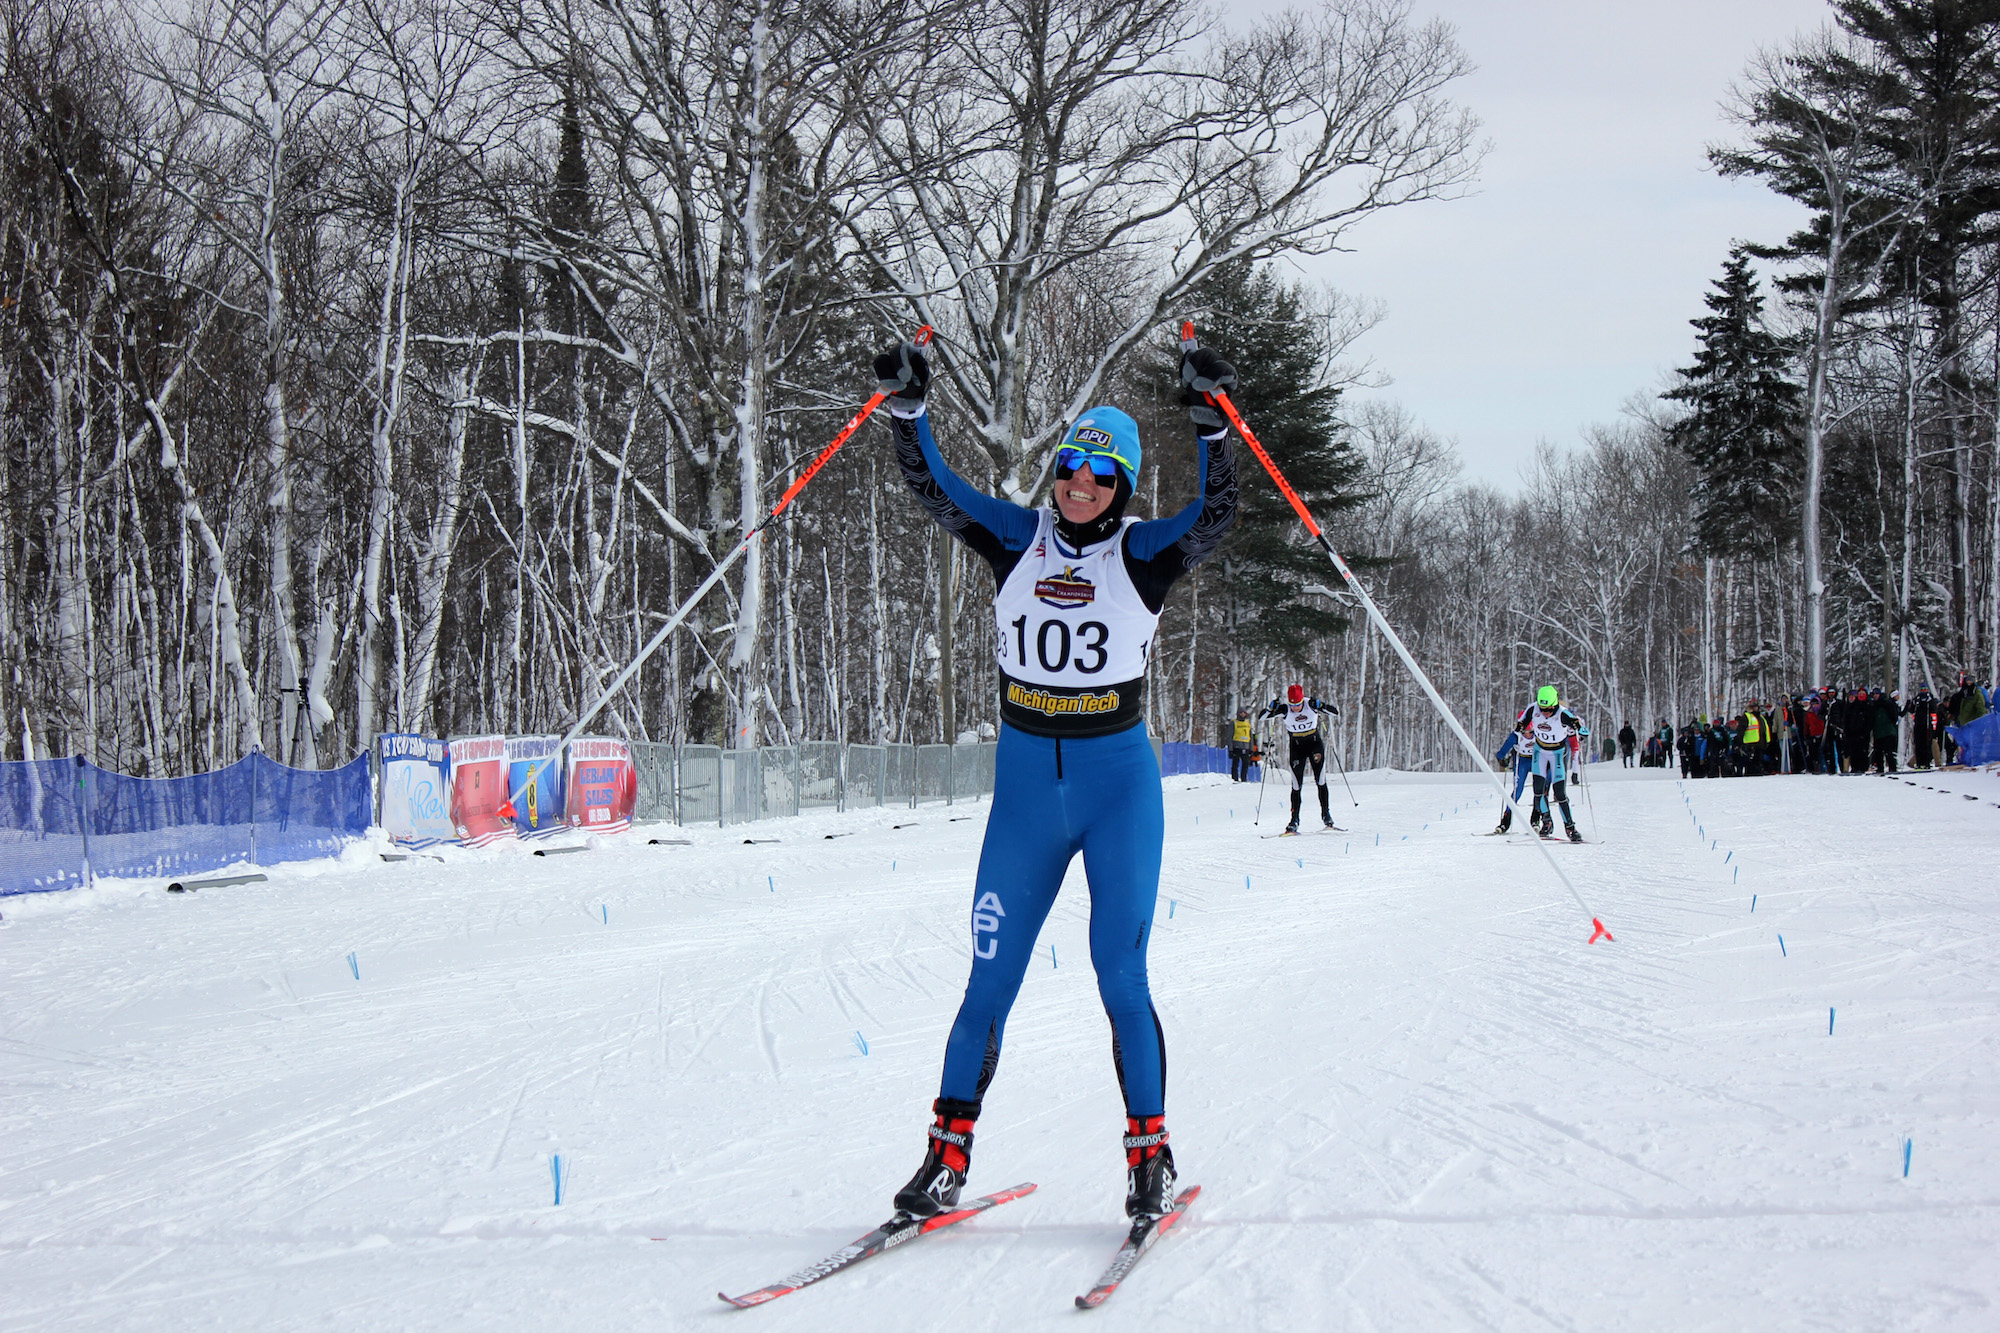 Alaska Pacific University's Rosie Brennan completes the trifecta in the last race of U.S. Cross Country Championships with a skate-sprint victory in Houghton, Mich.